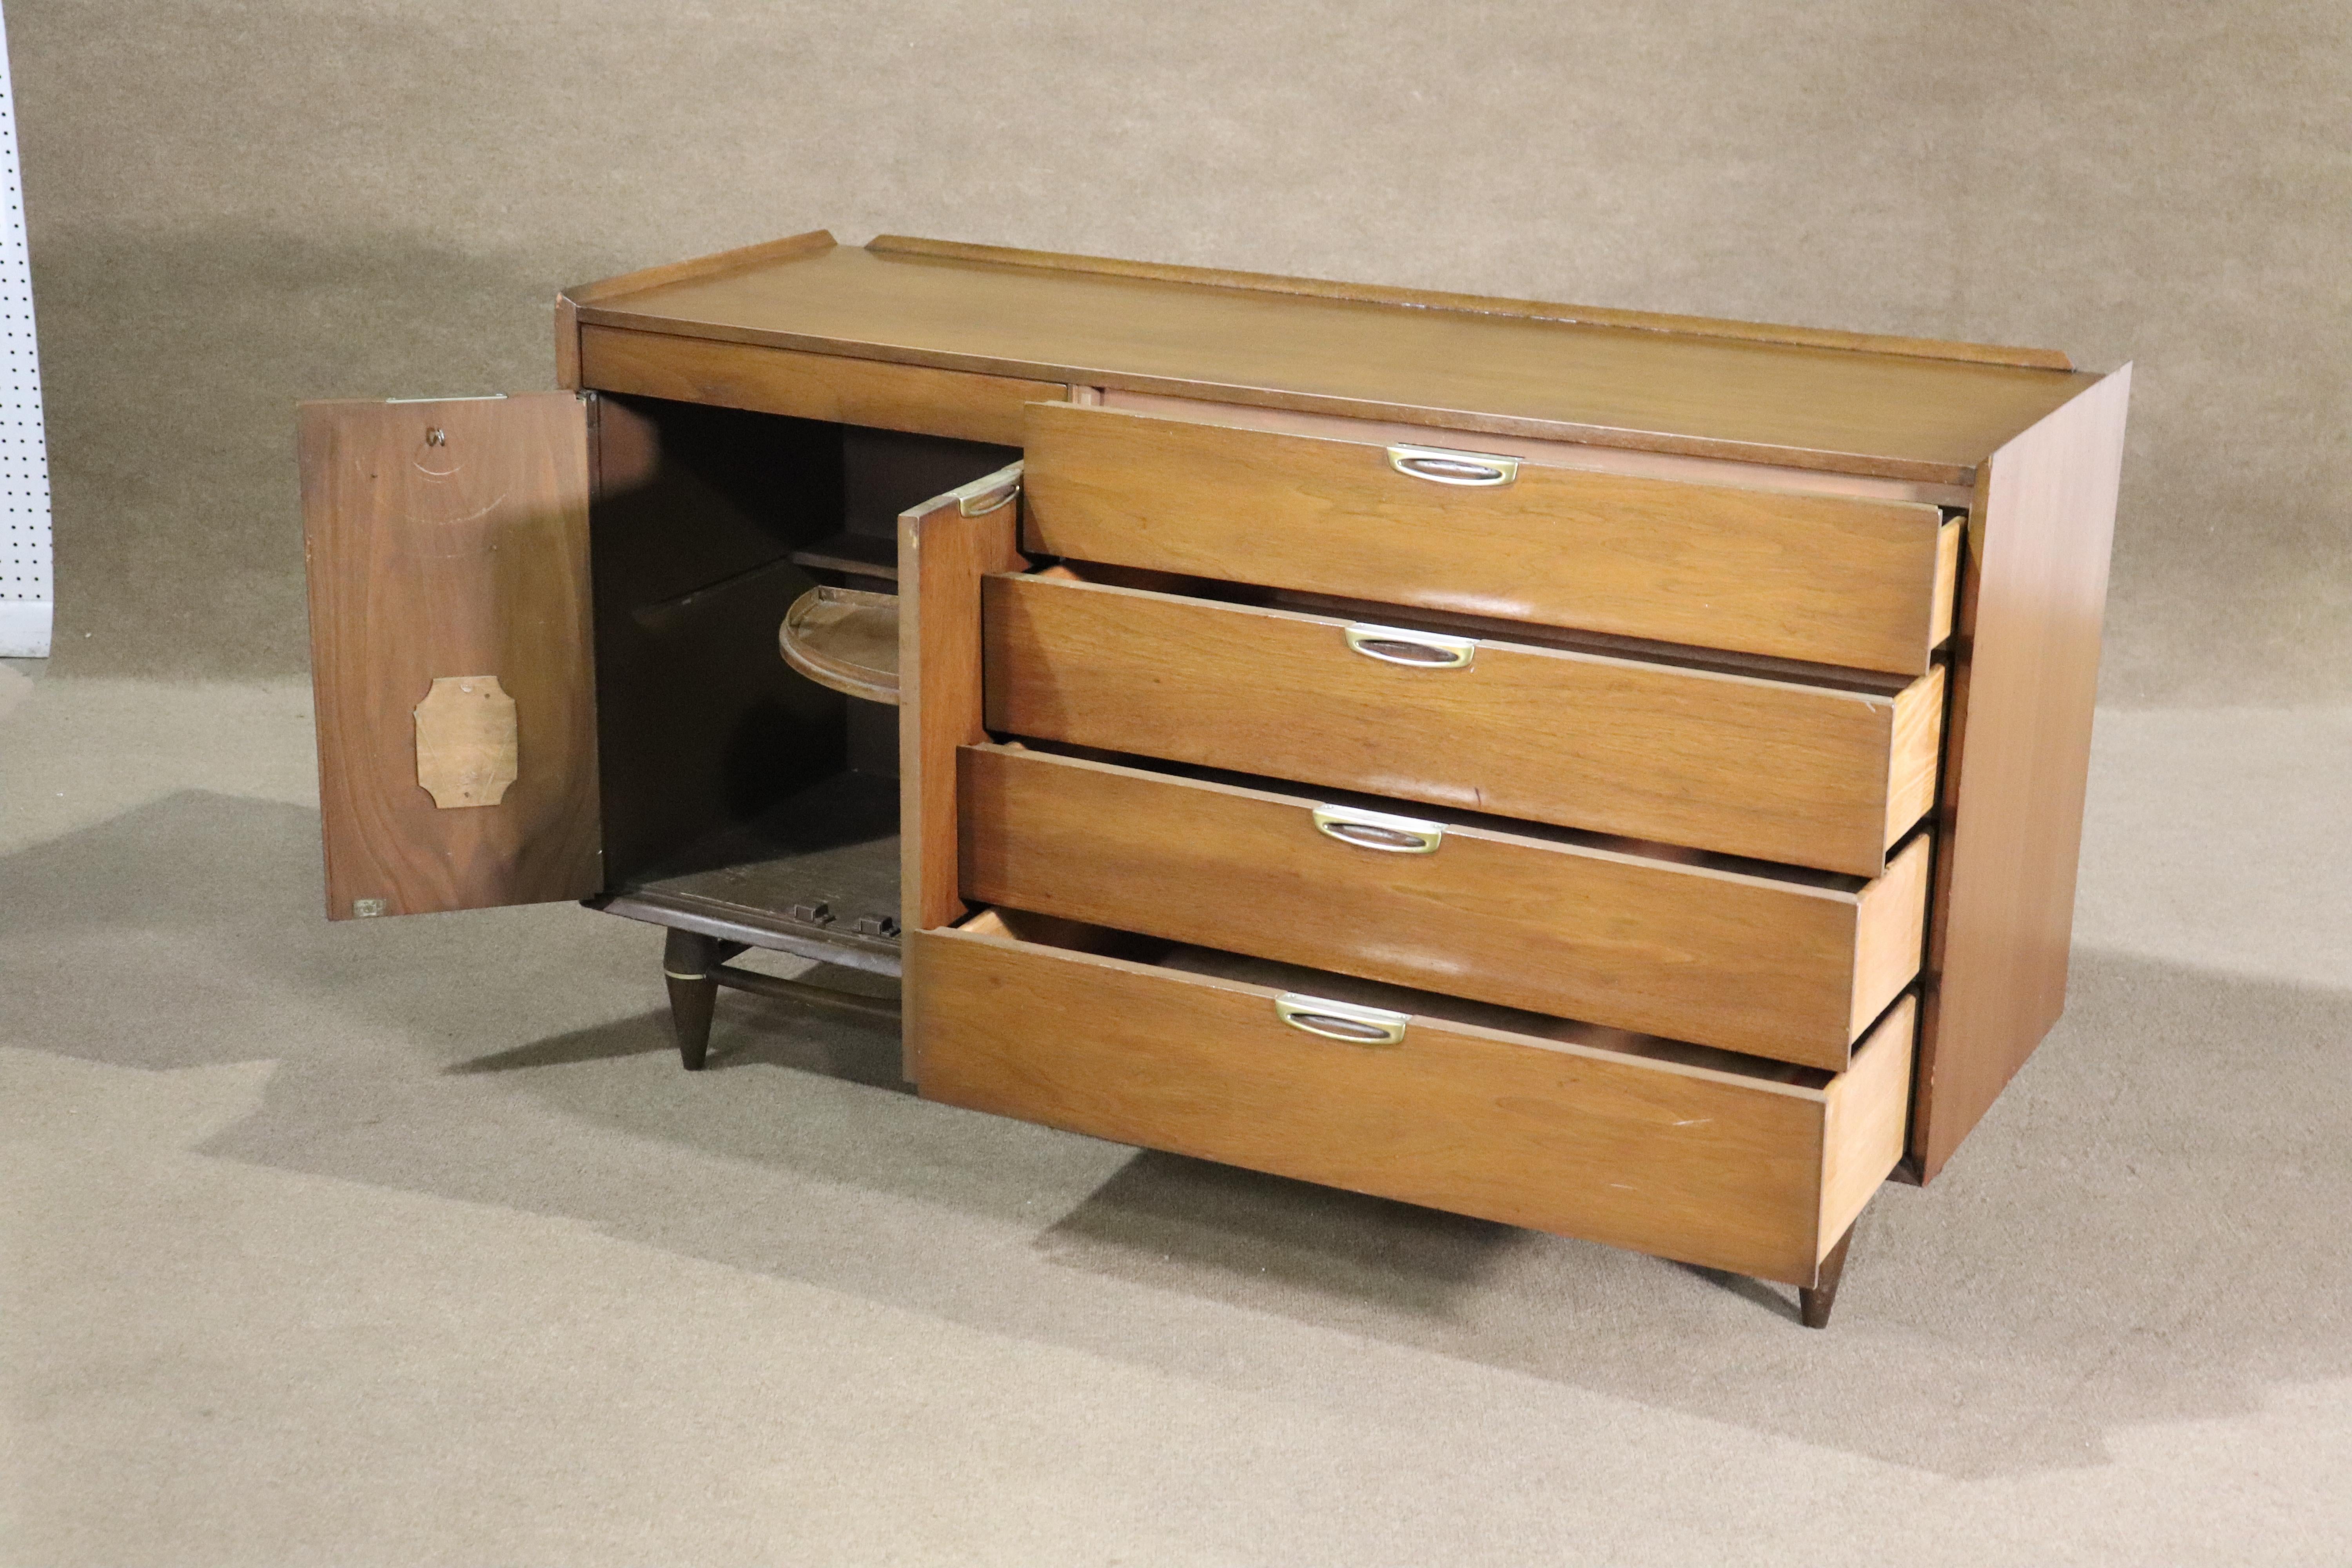 Bassett Furniture mid-century modern credenza with cabinet and drawer storage. Made for their 'Accent' series, featuring metal hardware, raised edges, and tapered legs.
Please confirm location NY or NJ